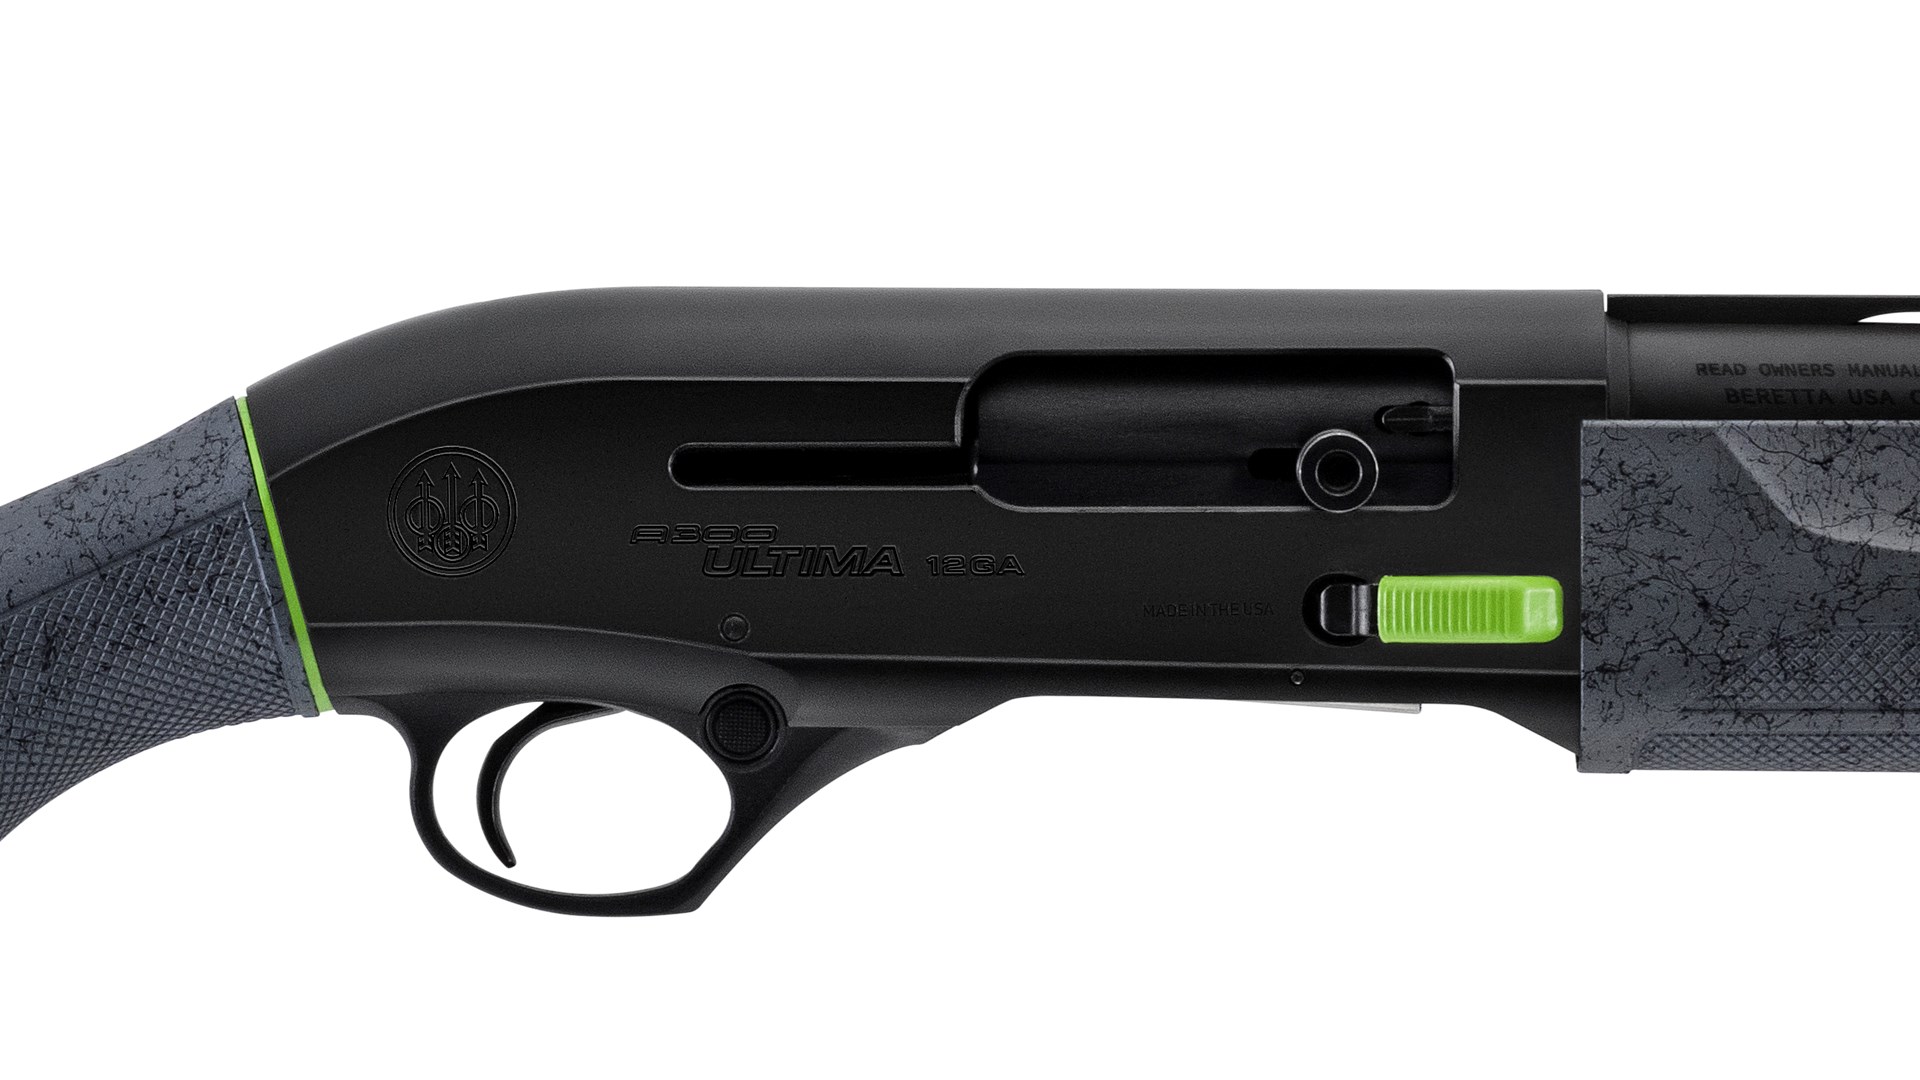 A close-up of the right side of the black receiver of the Beretta A300 Ultima Sporting shotgun on a white background.